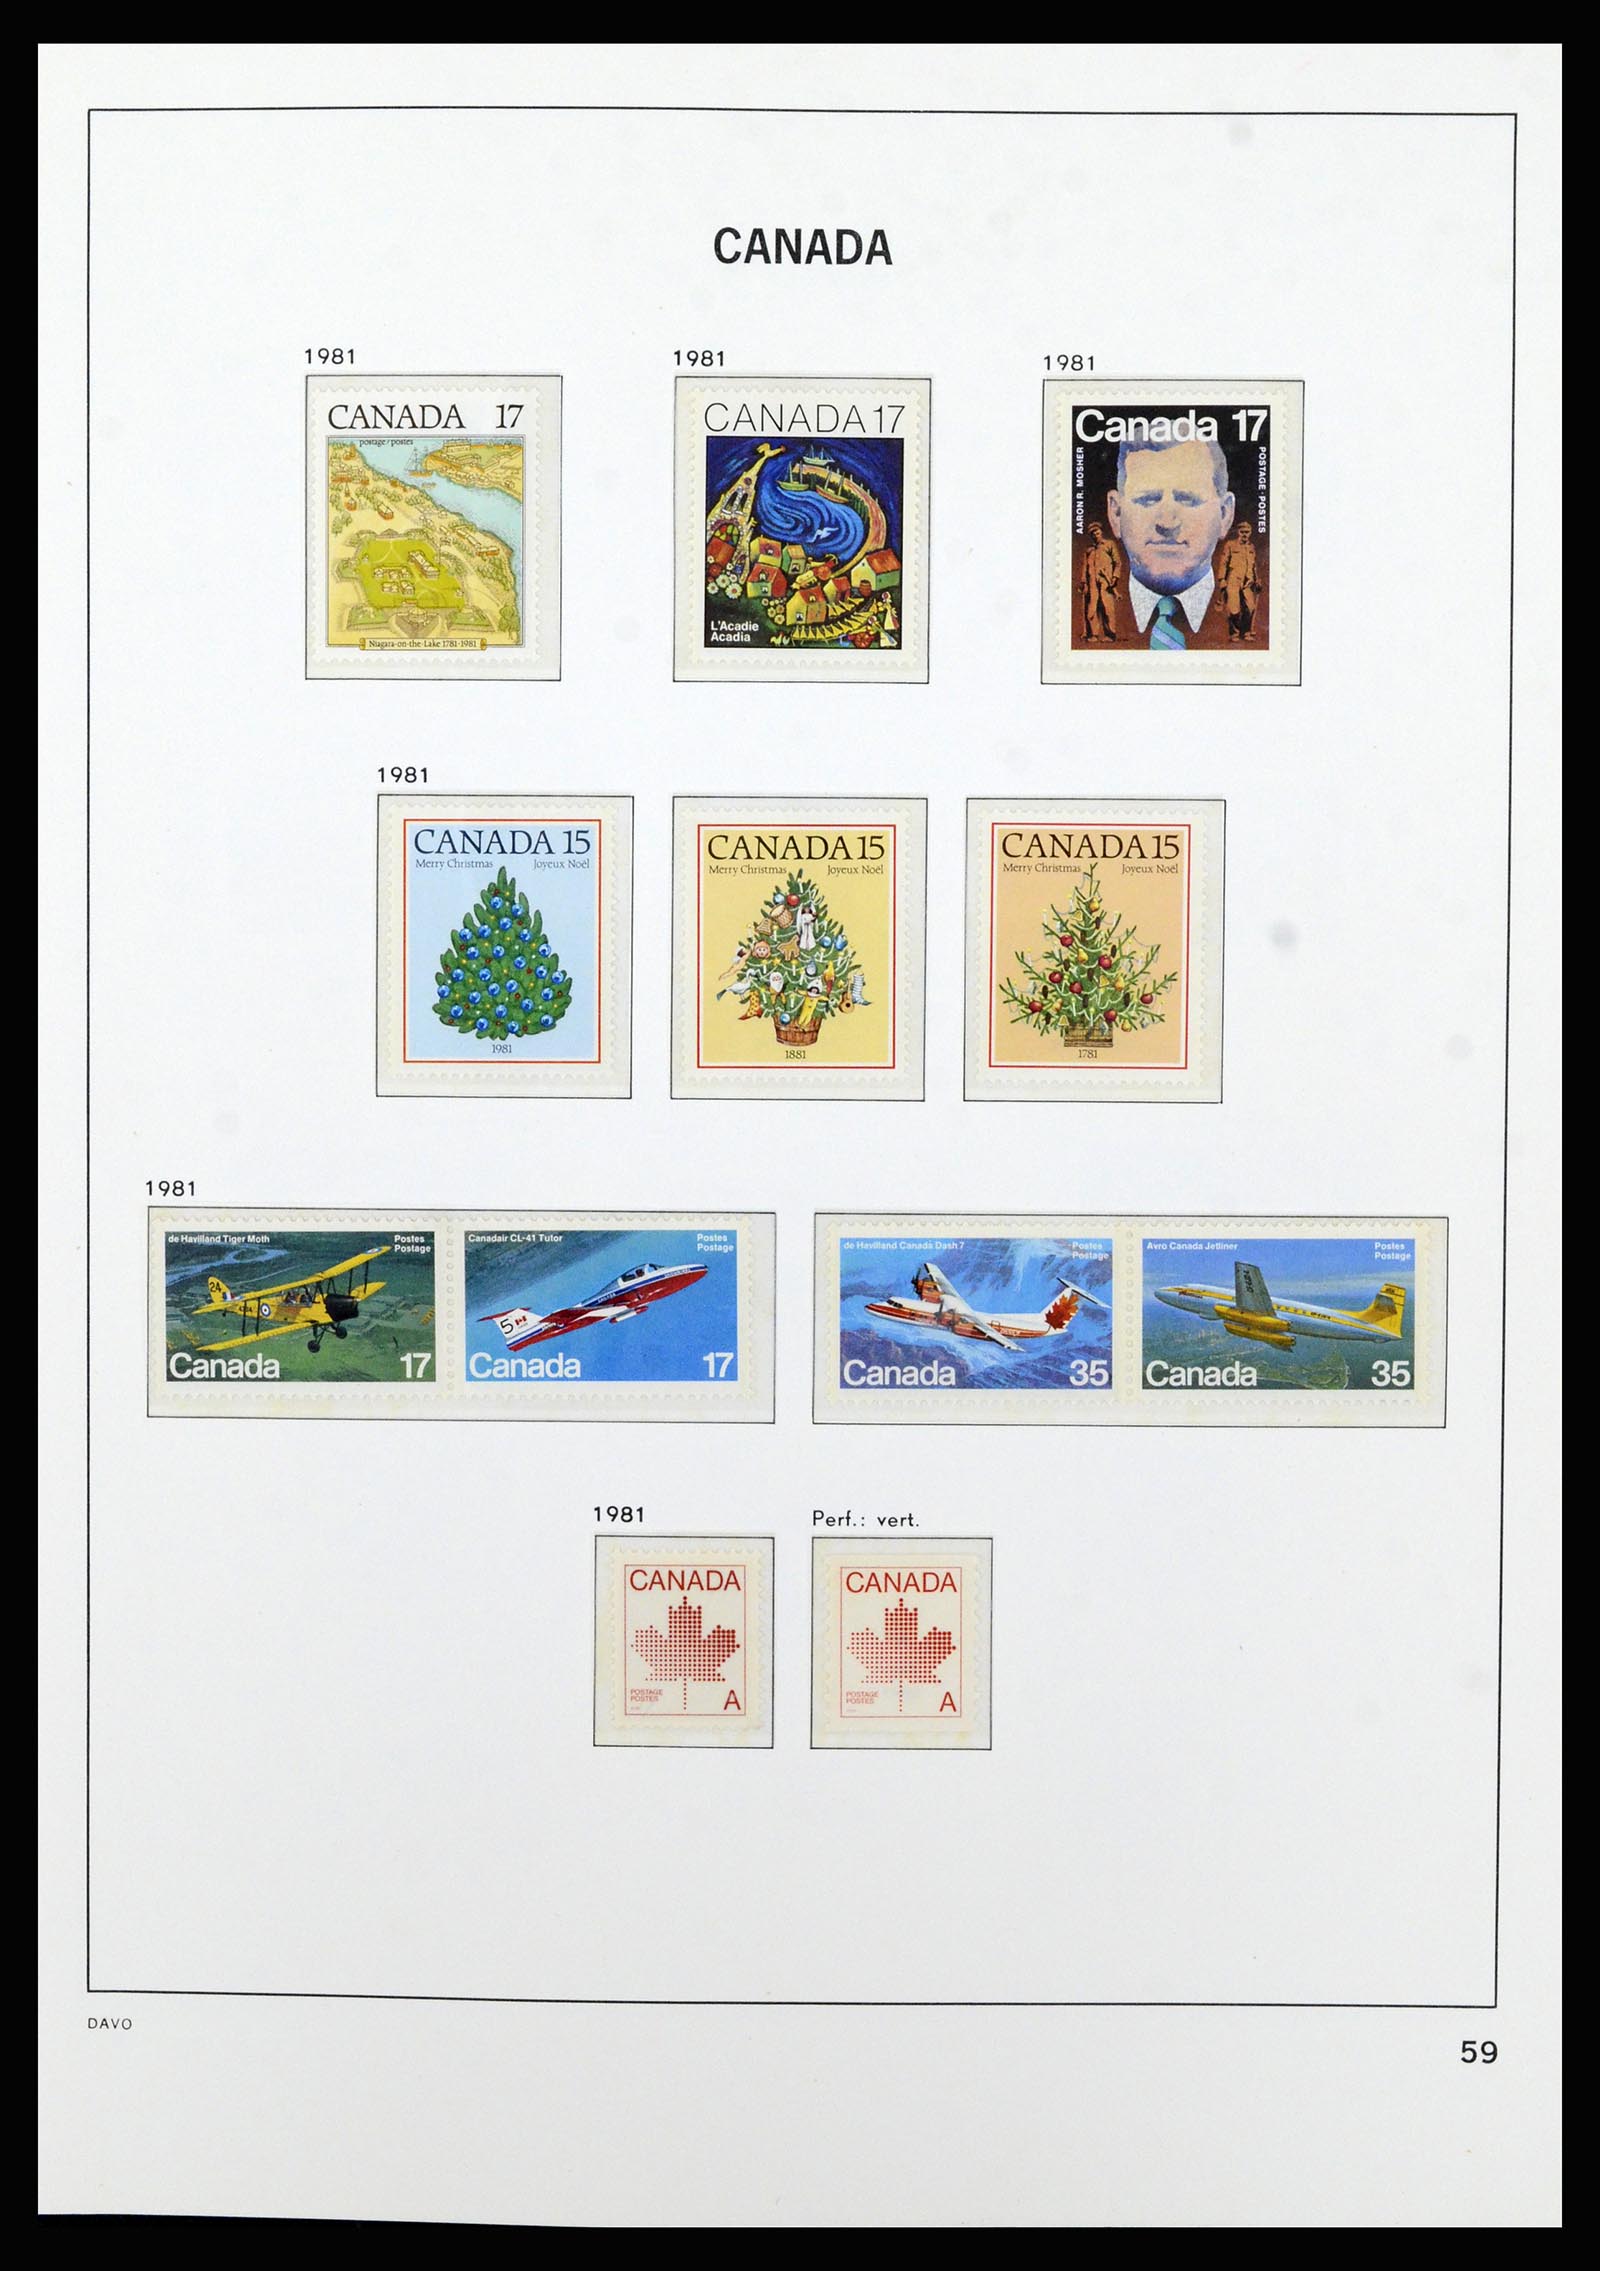 37063 072 - Stamp collection 37063 Canada 1859-1985.